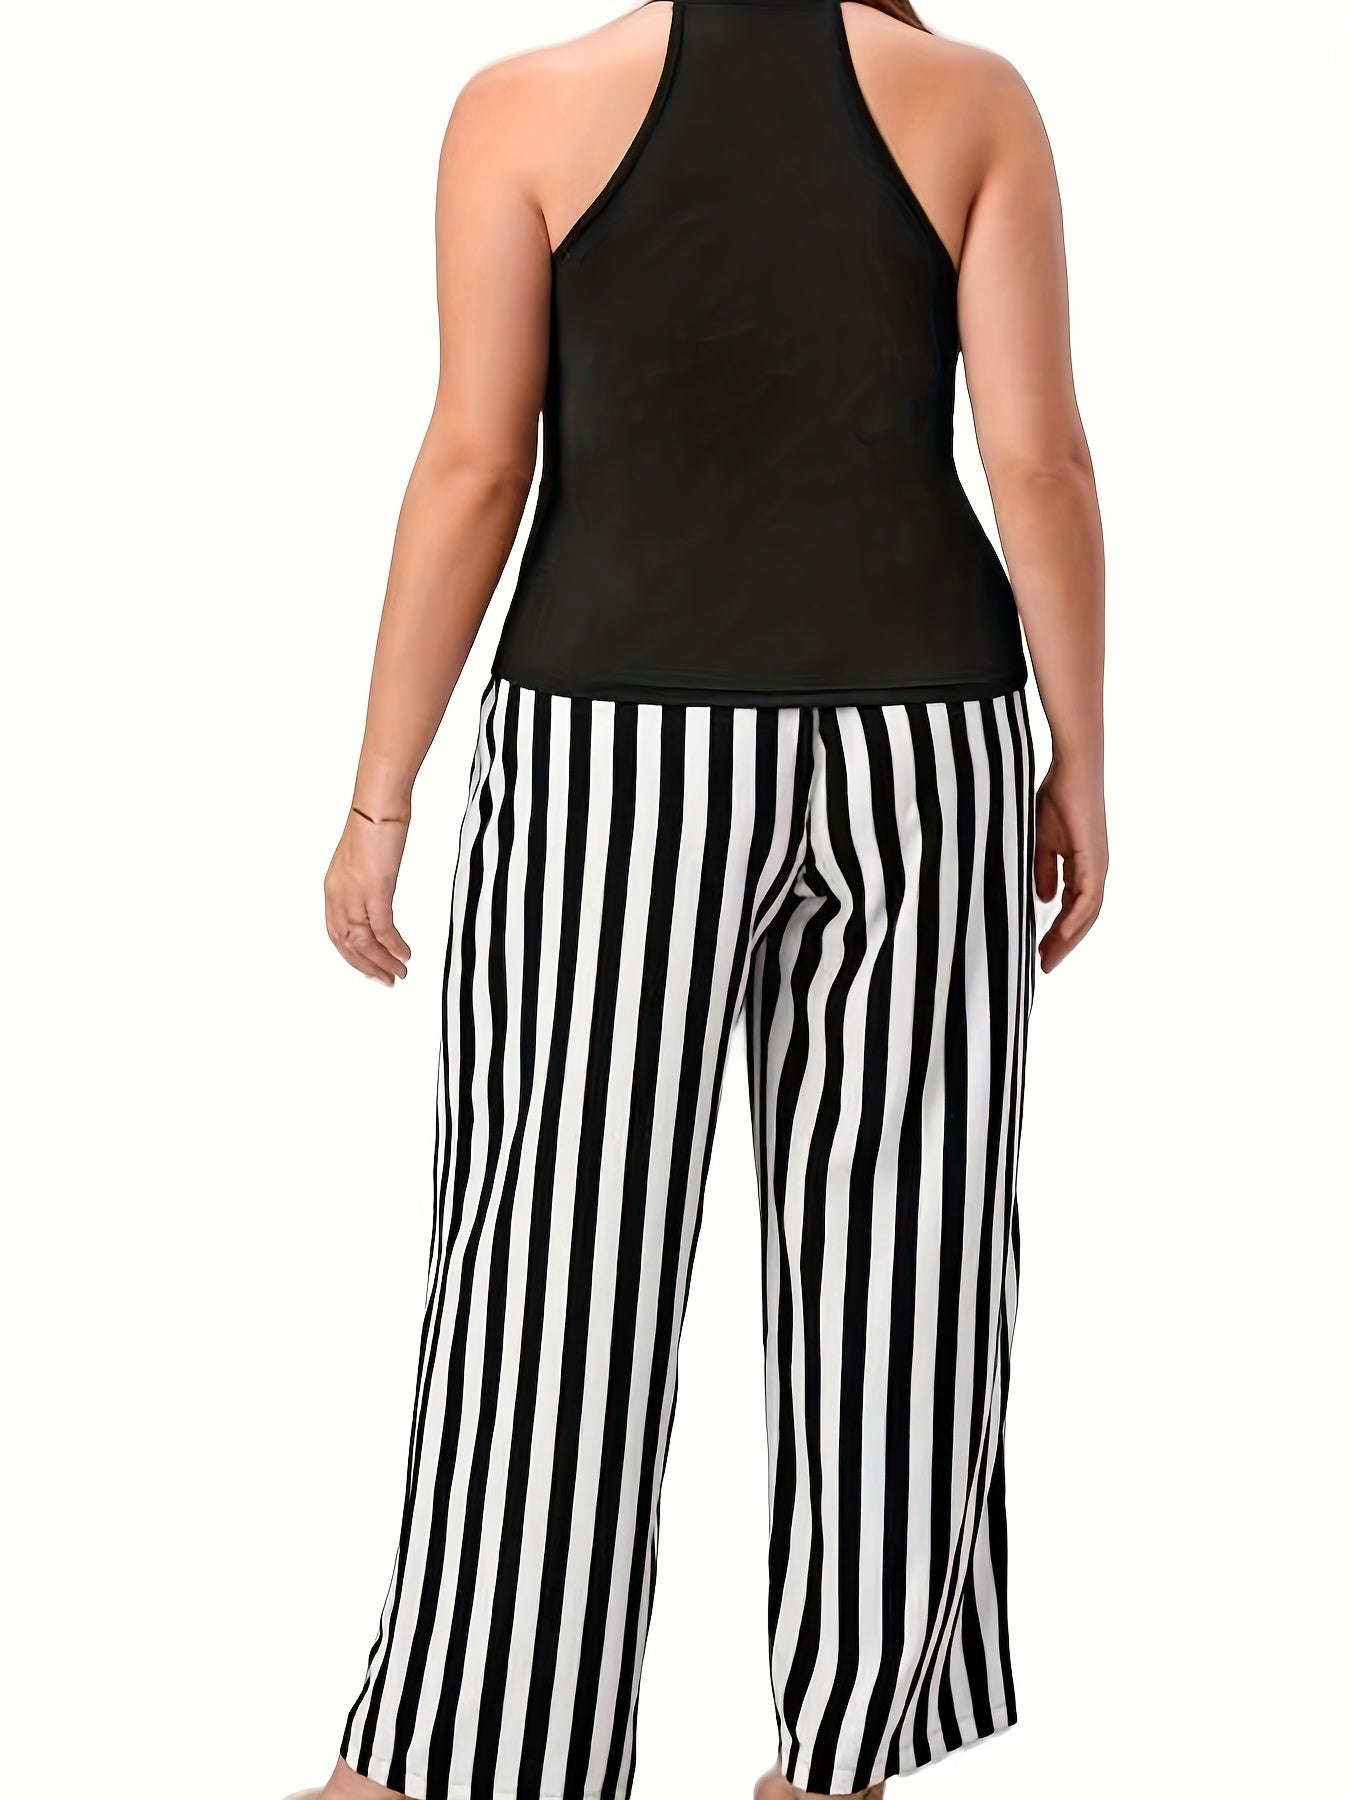 Plus Size Elegant Outfits Set, Women's Plus Solid Halter Neck Cami Top & Striped Pants With Belt Outfits Two Piece Set